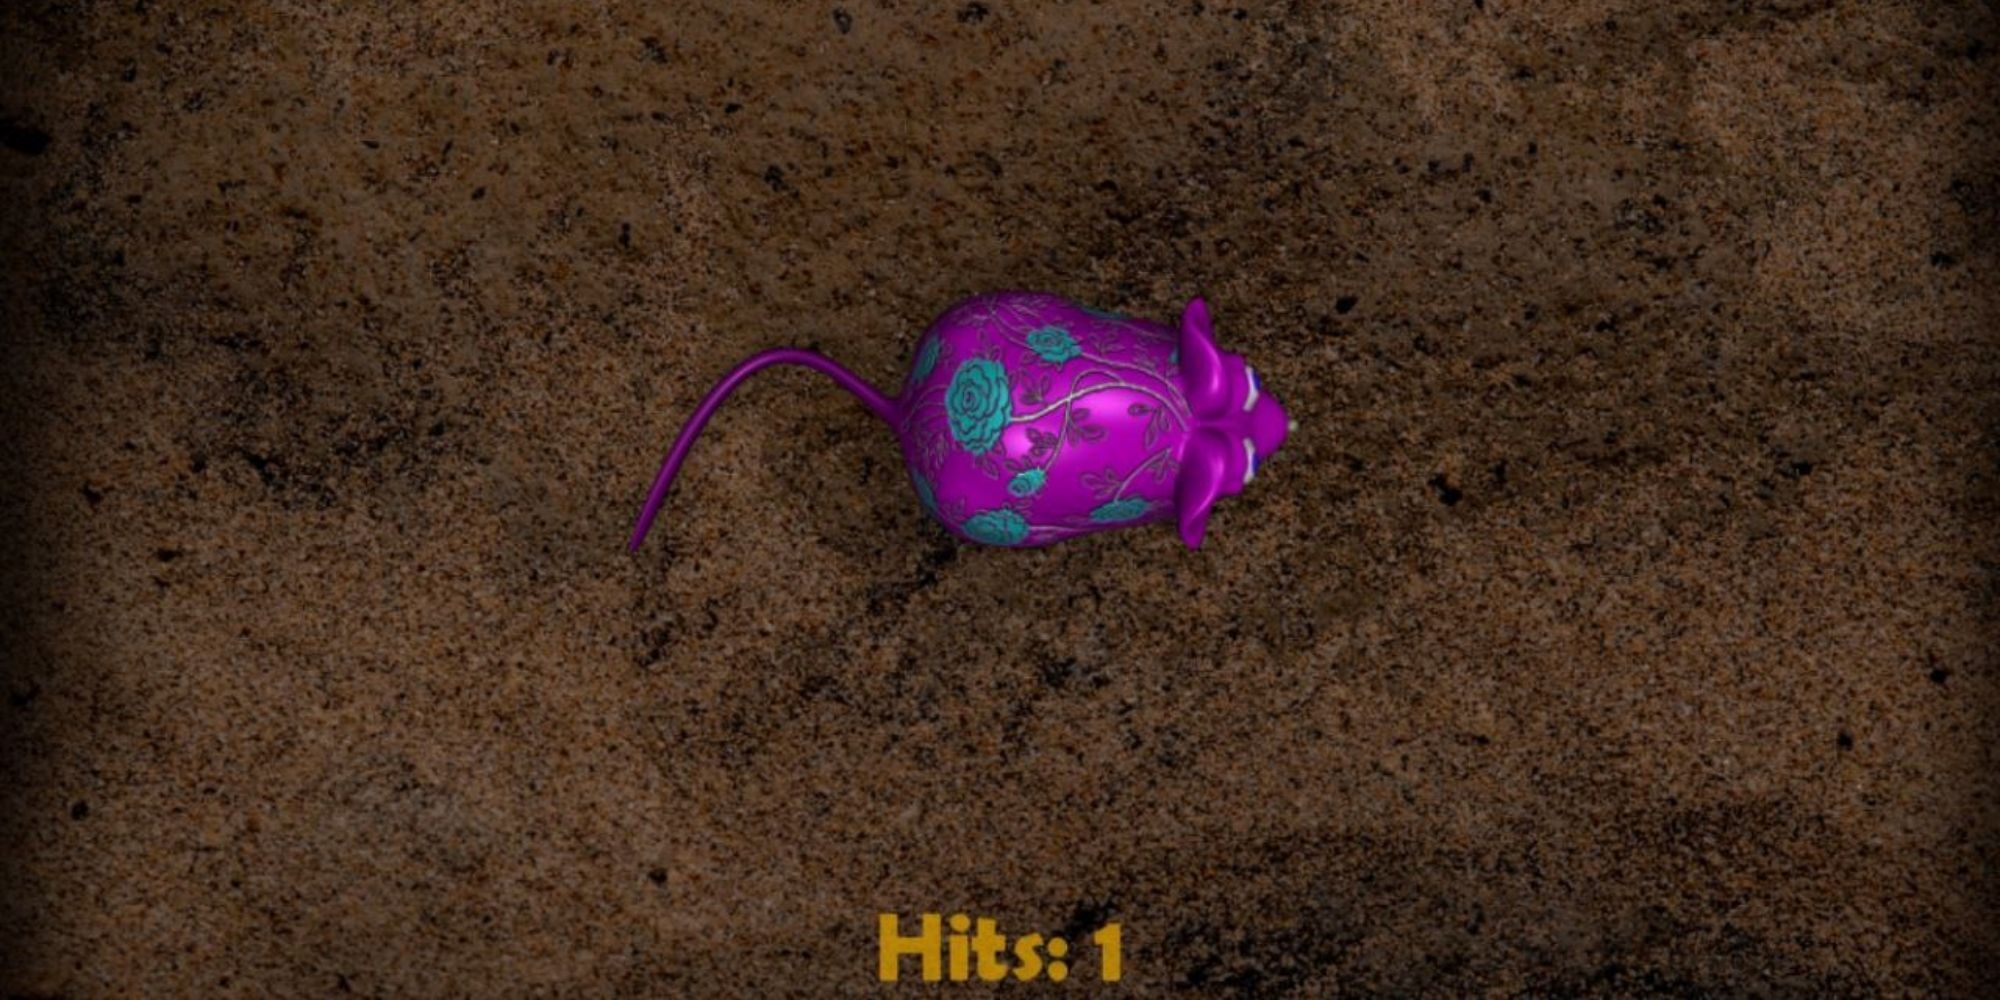 purple mouse with green spots scuttles around the ground with 1 hit